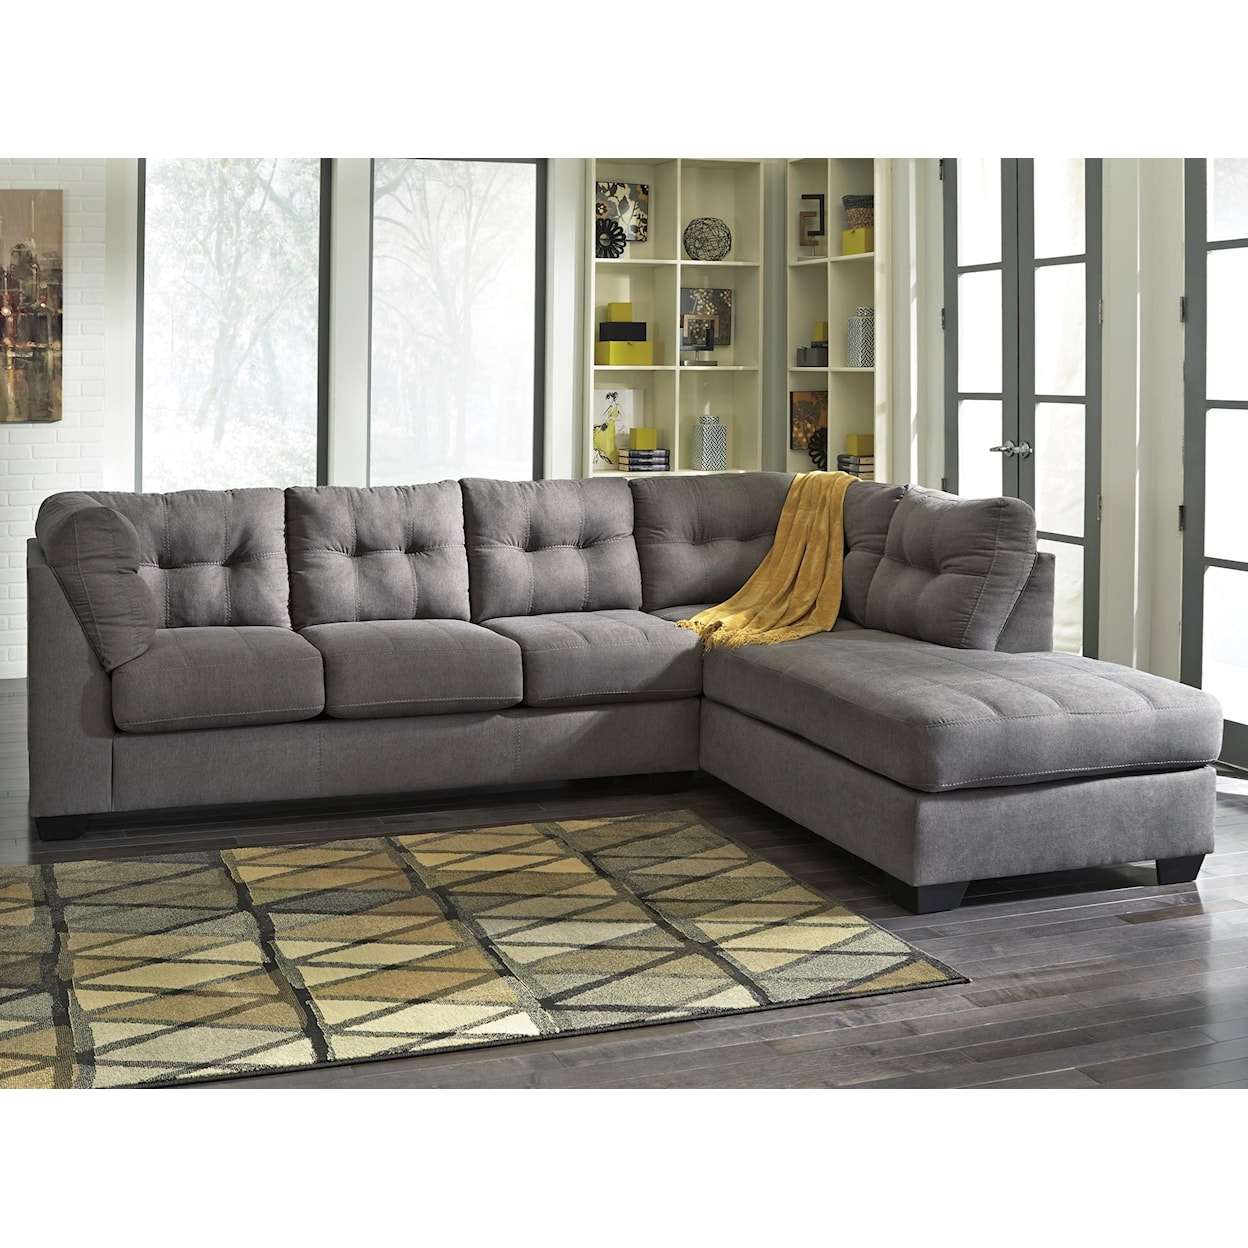 Ashley Maier 2-Piece Sleeper Sectional with Chaise